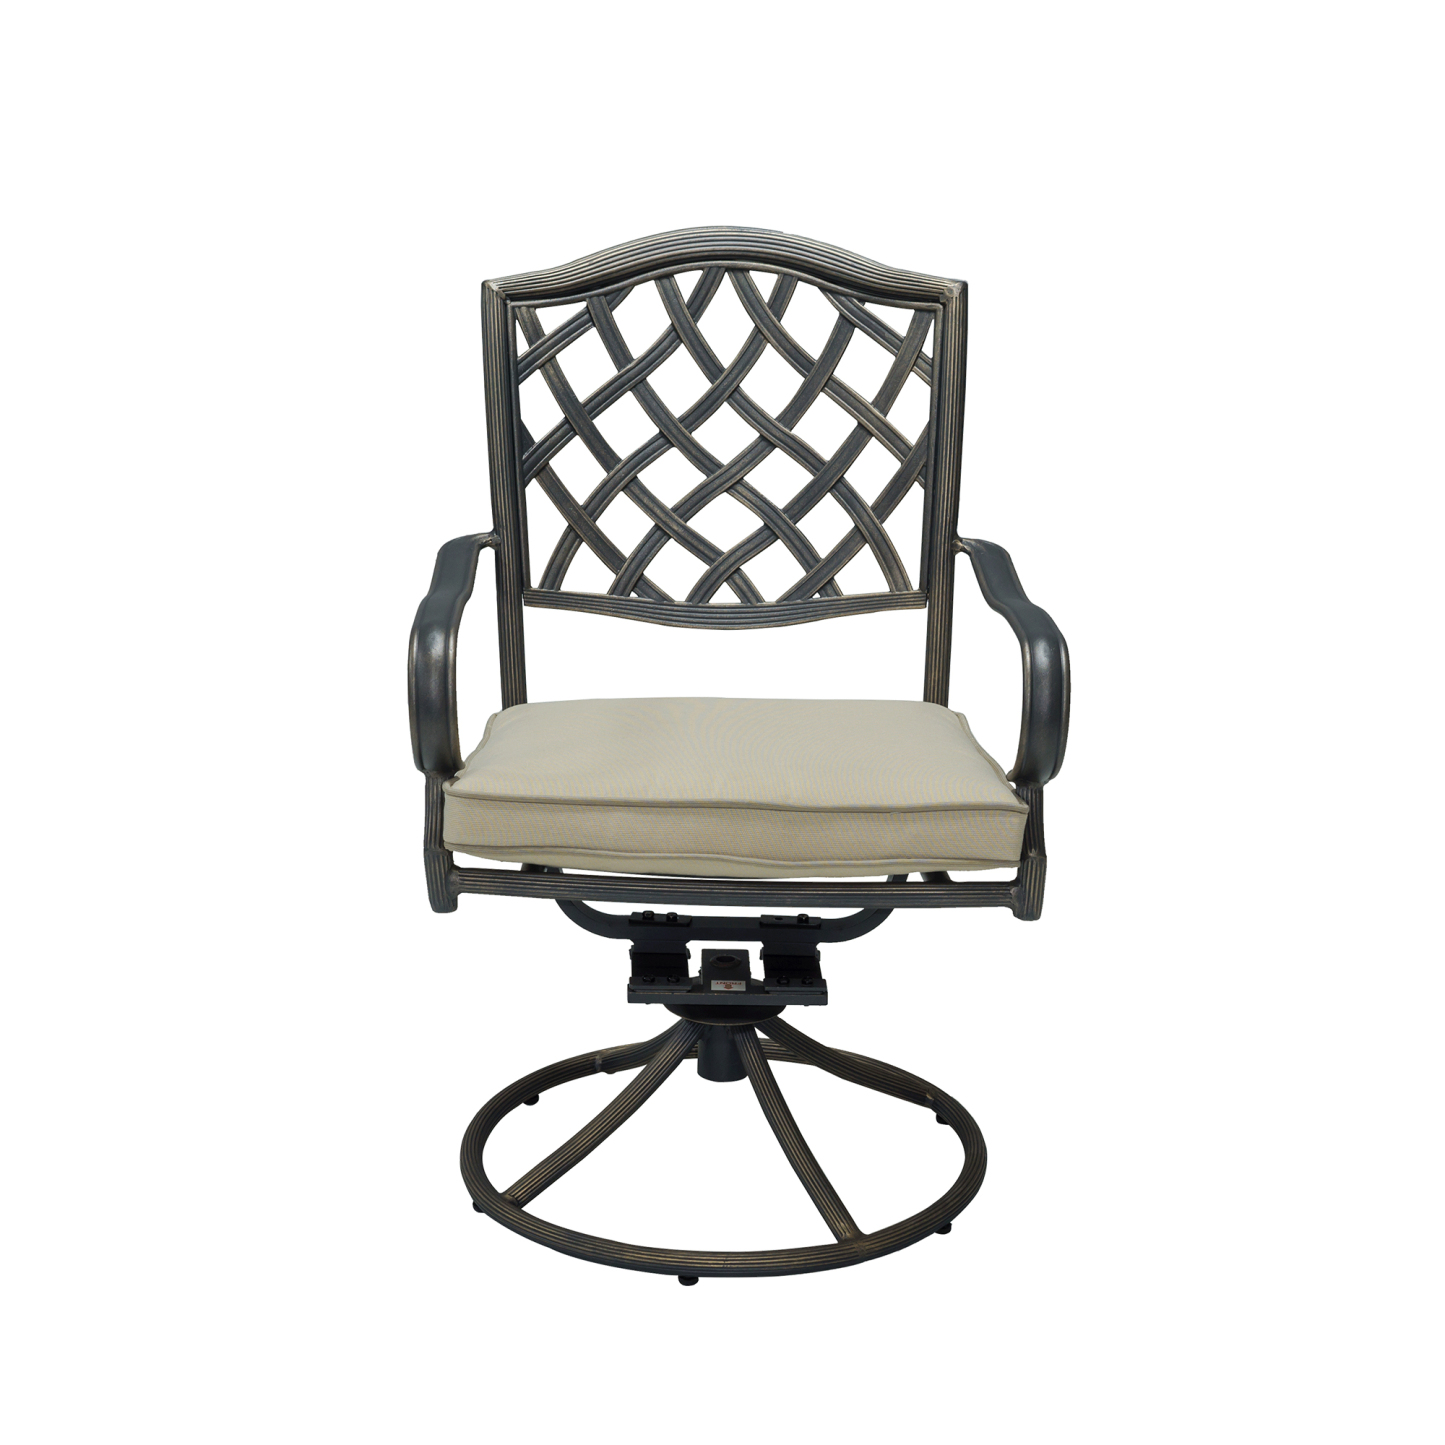 Mondawe 2 Pieces Swivel Aluminum Patio Dining Chairs with Cushion for Garden Backyard Bistro Furniture-Mondawe